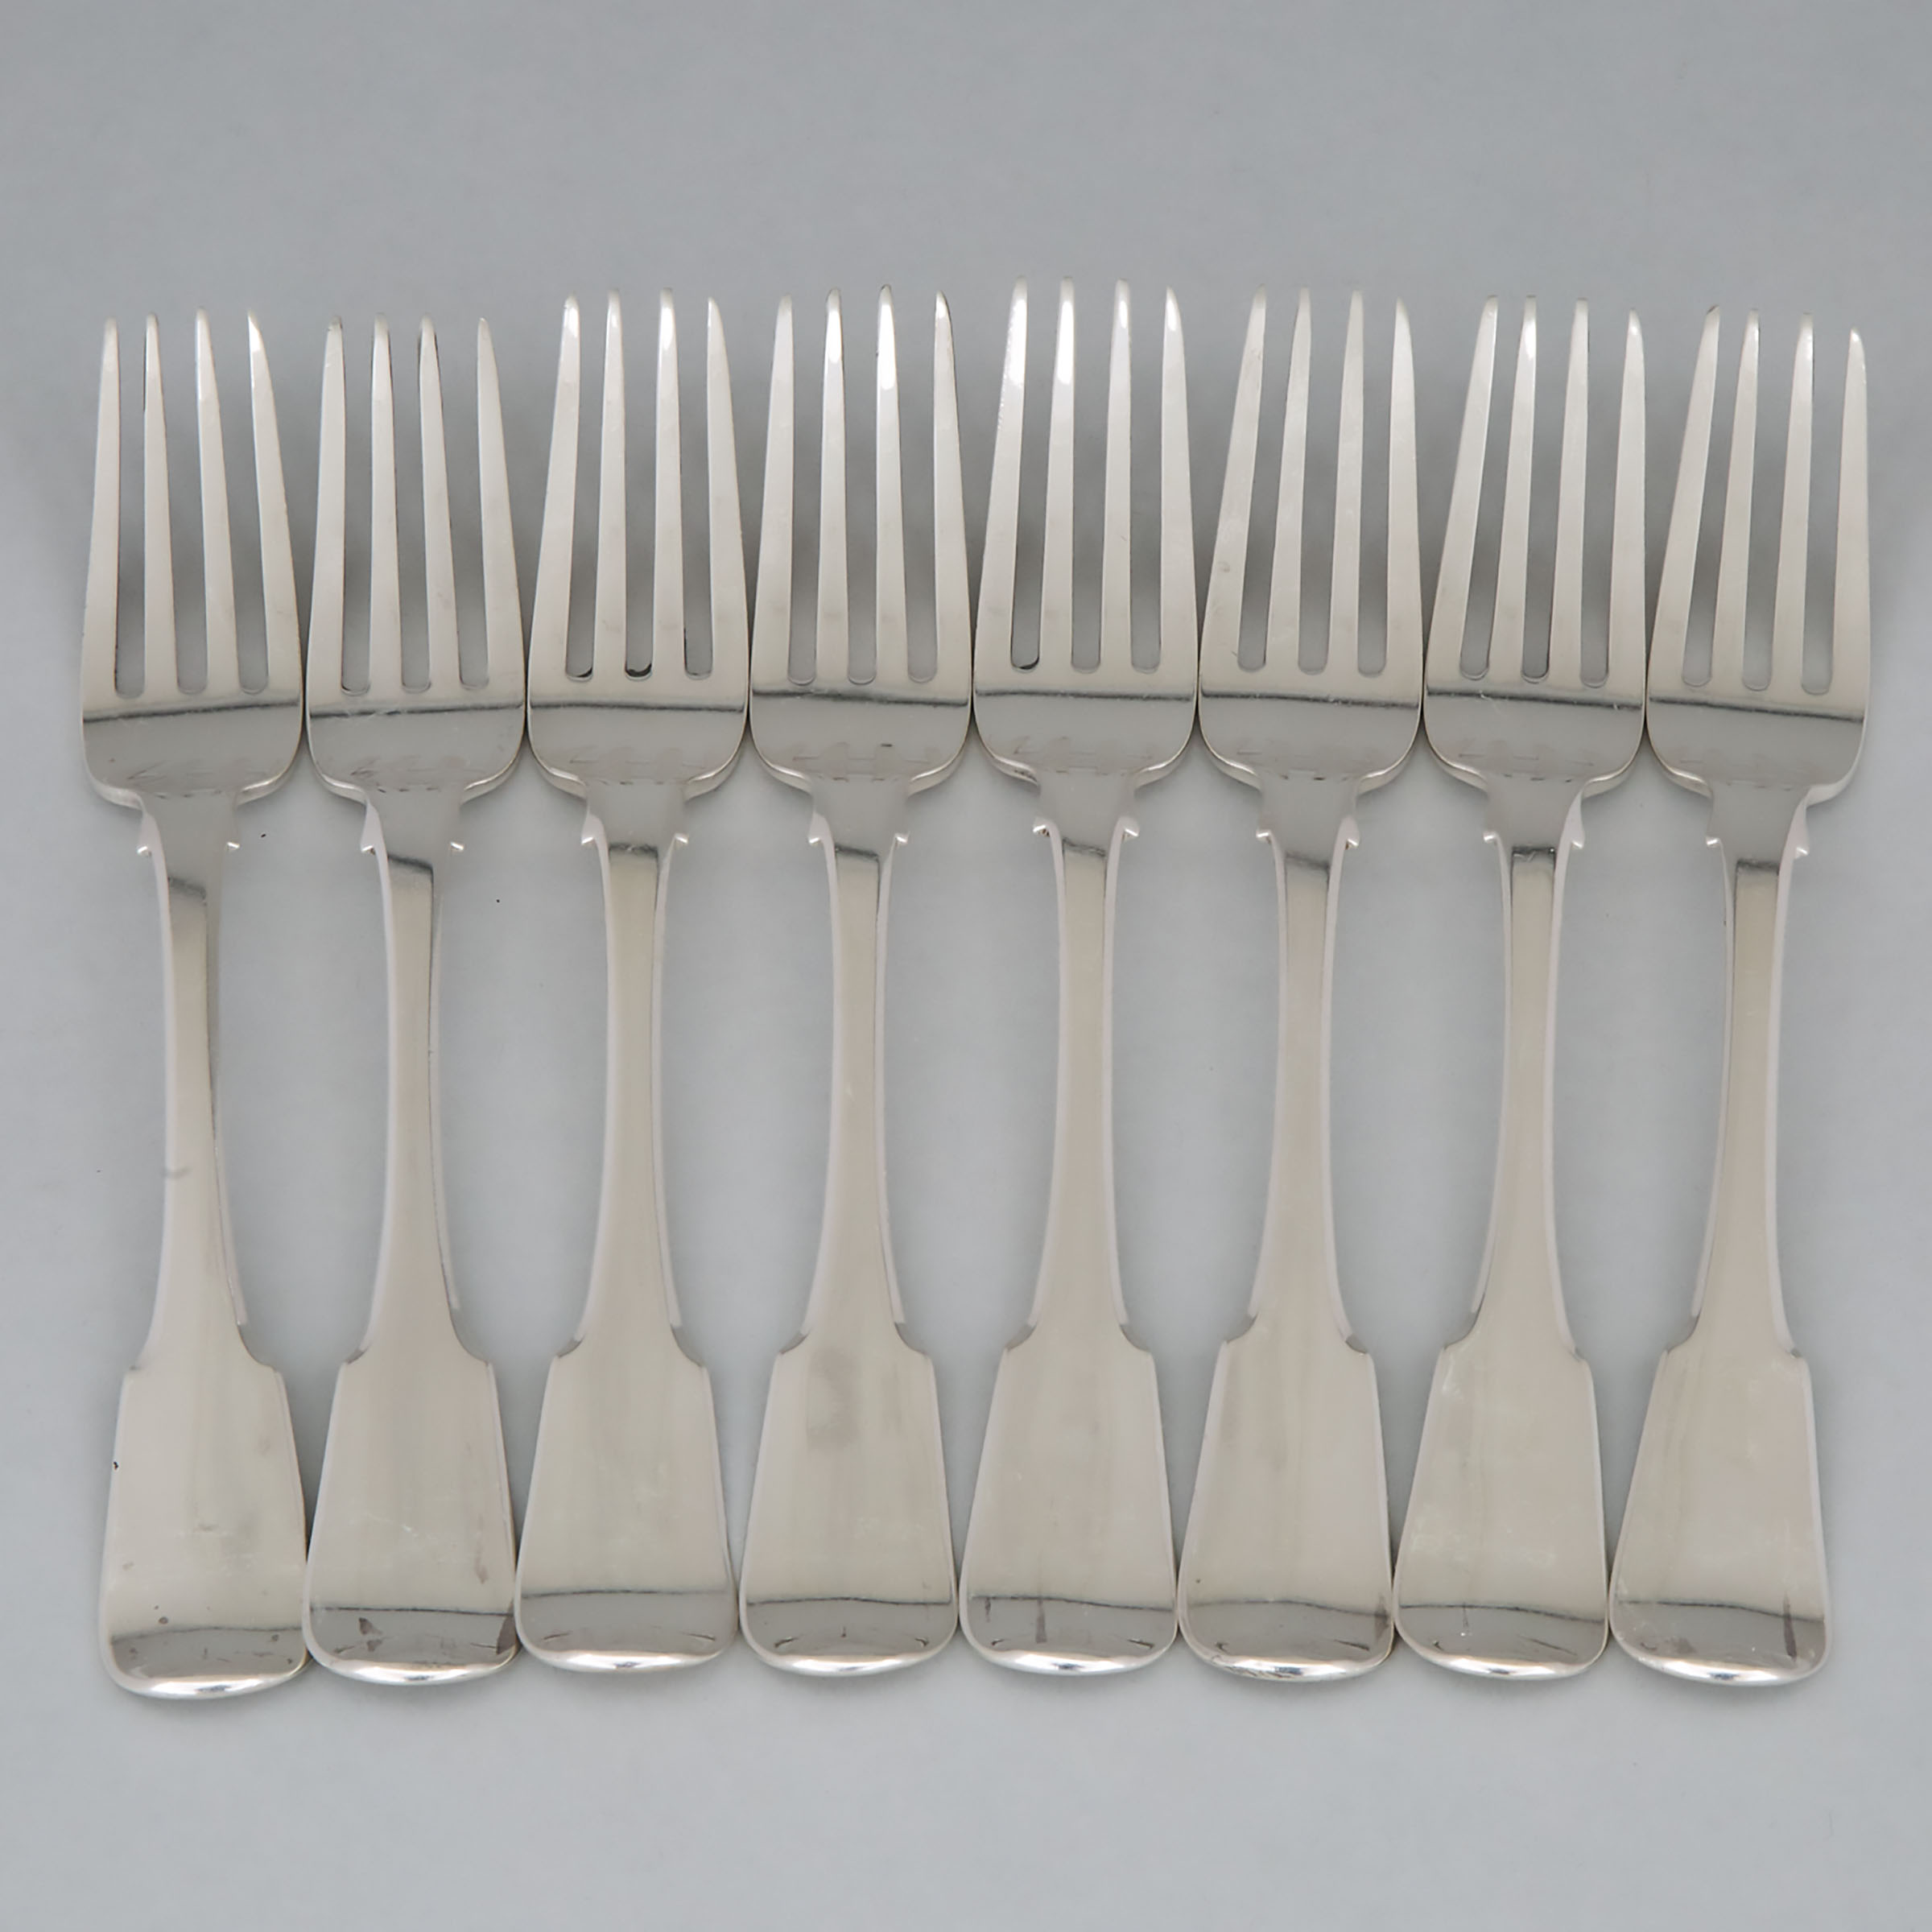 Eight George III Silver Fiddle Pattern Table Forks, Thomas Wilkes Barker, London, 1818